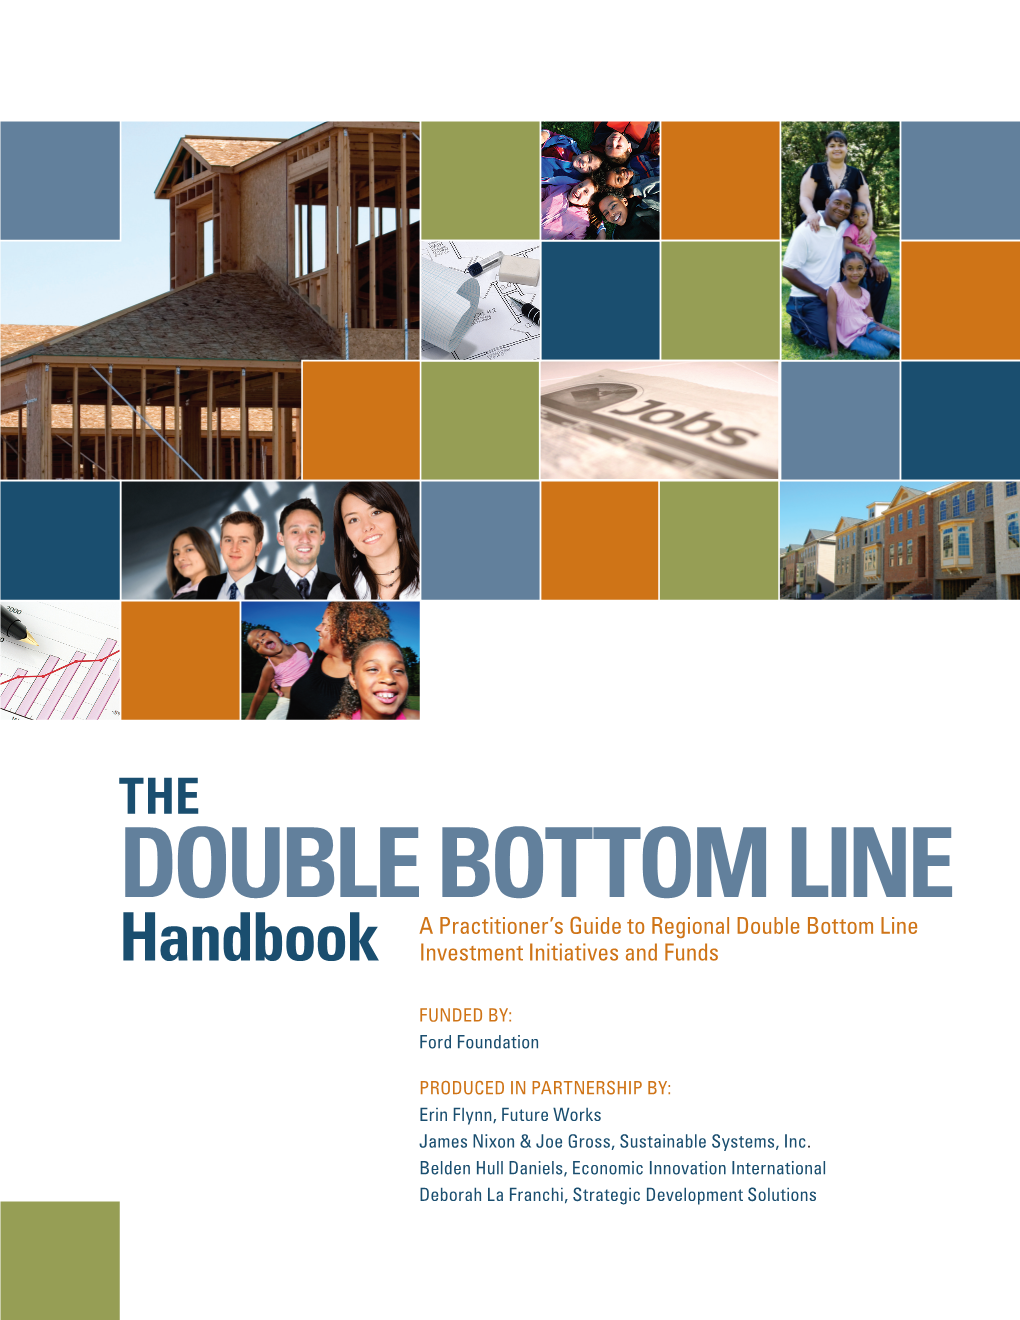 Handbook a Practitioner's Guide to Regional Double Bottom Line